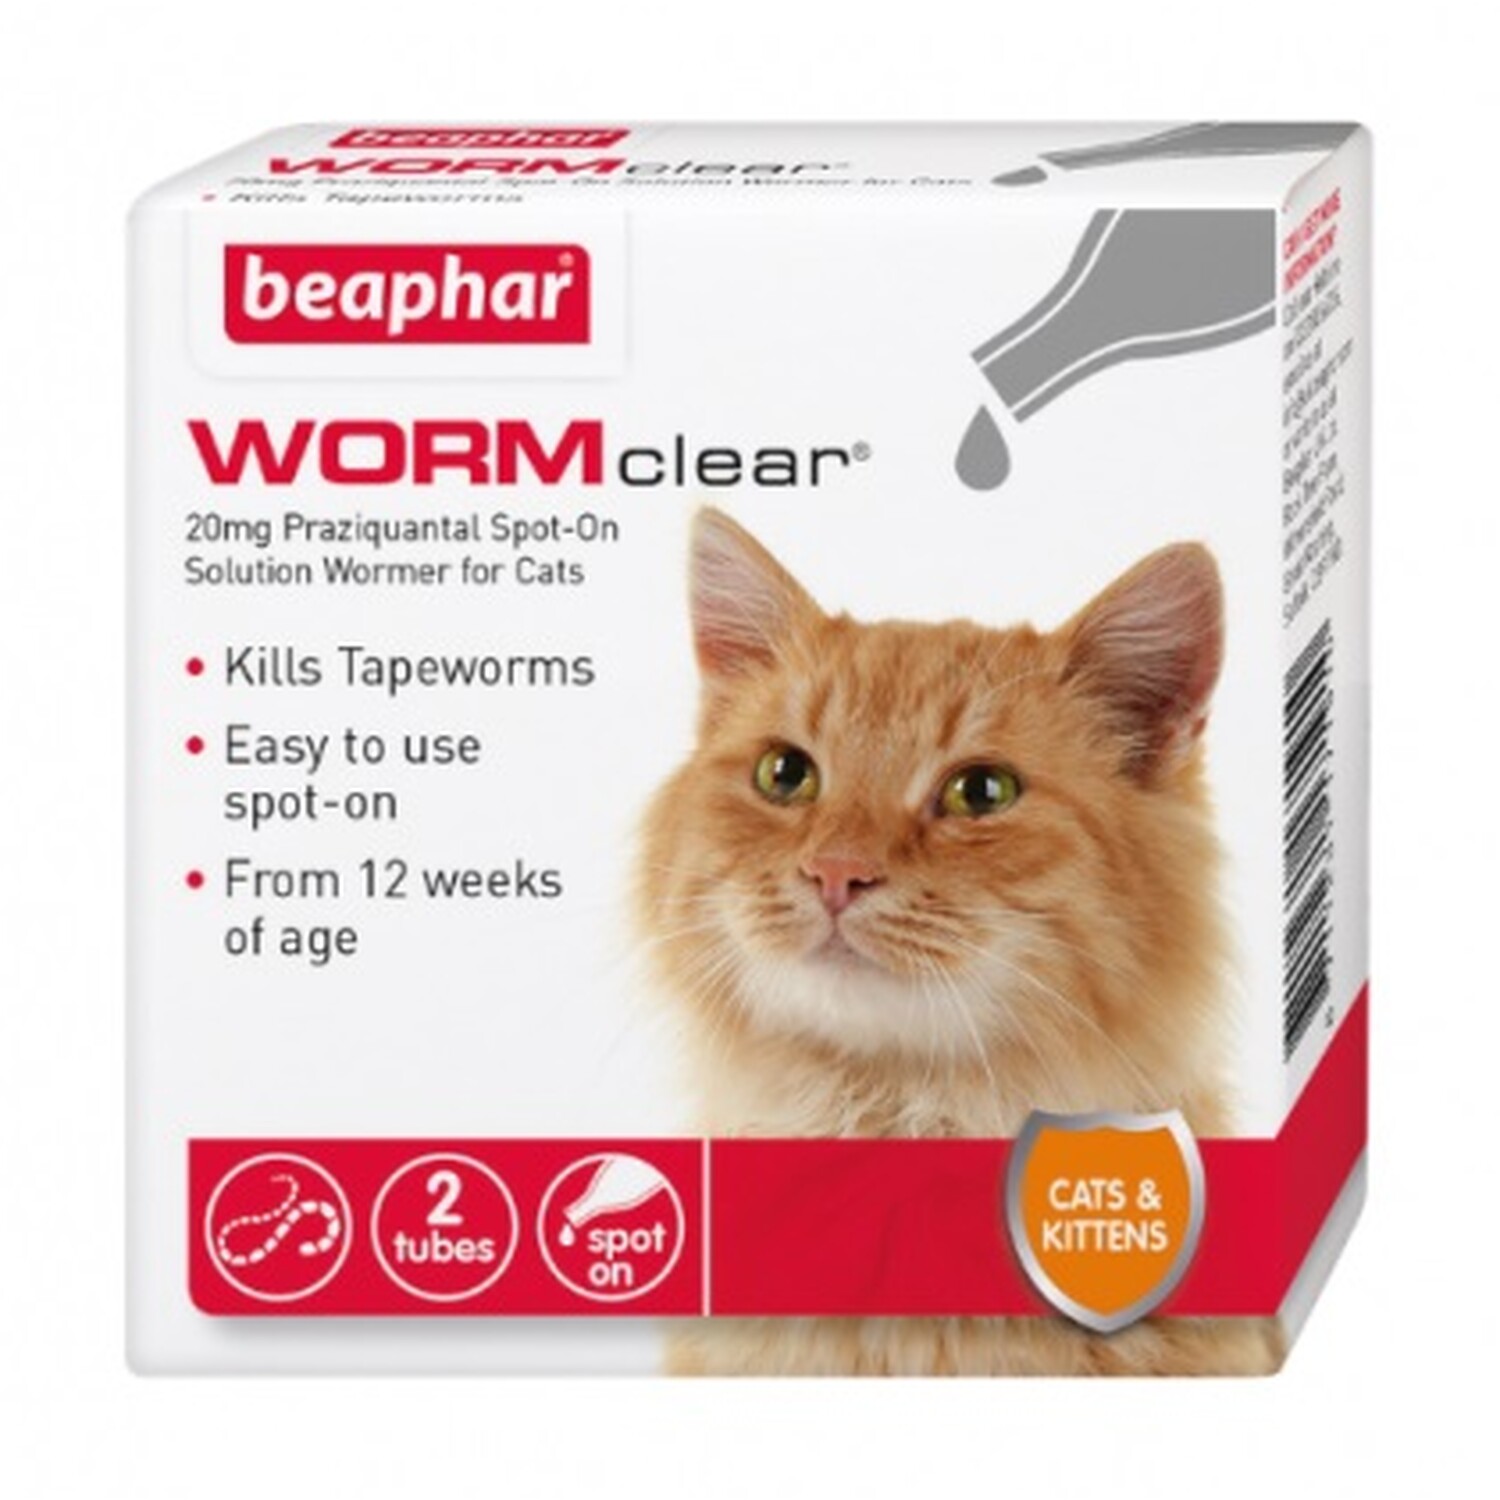 Wormclear Spot on Solution for Cats Image